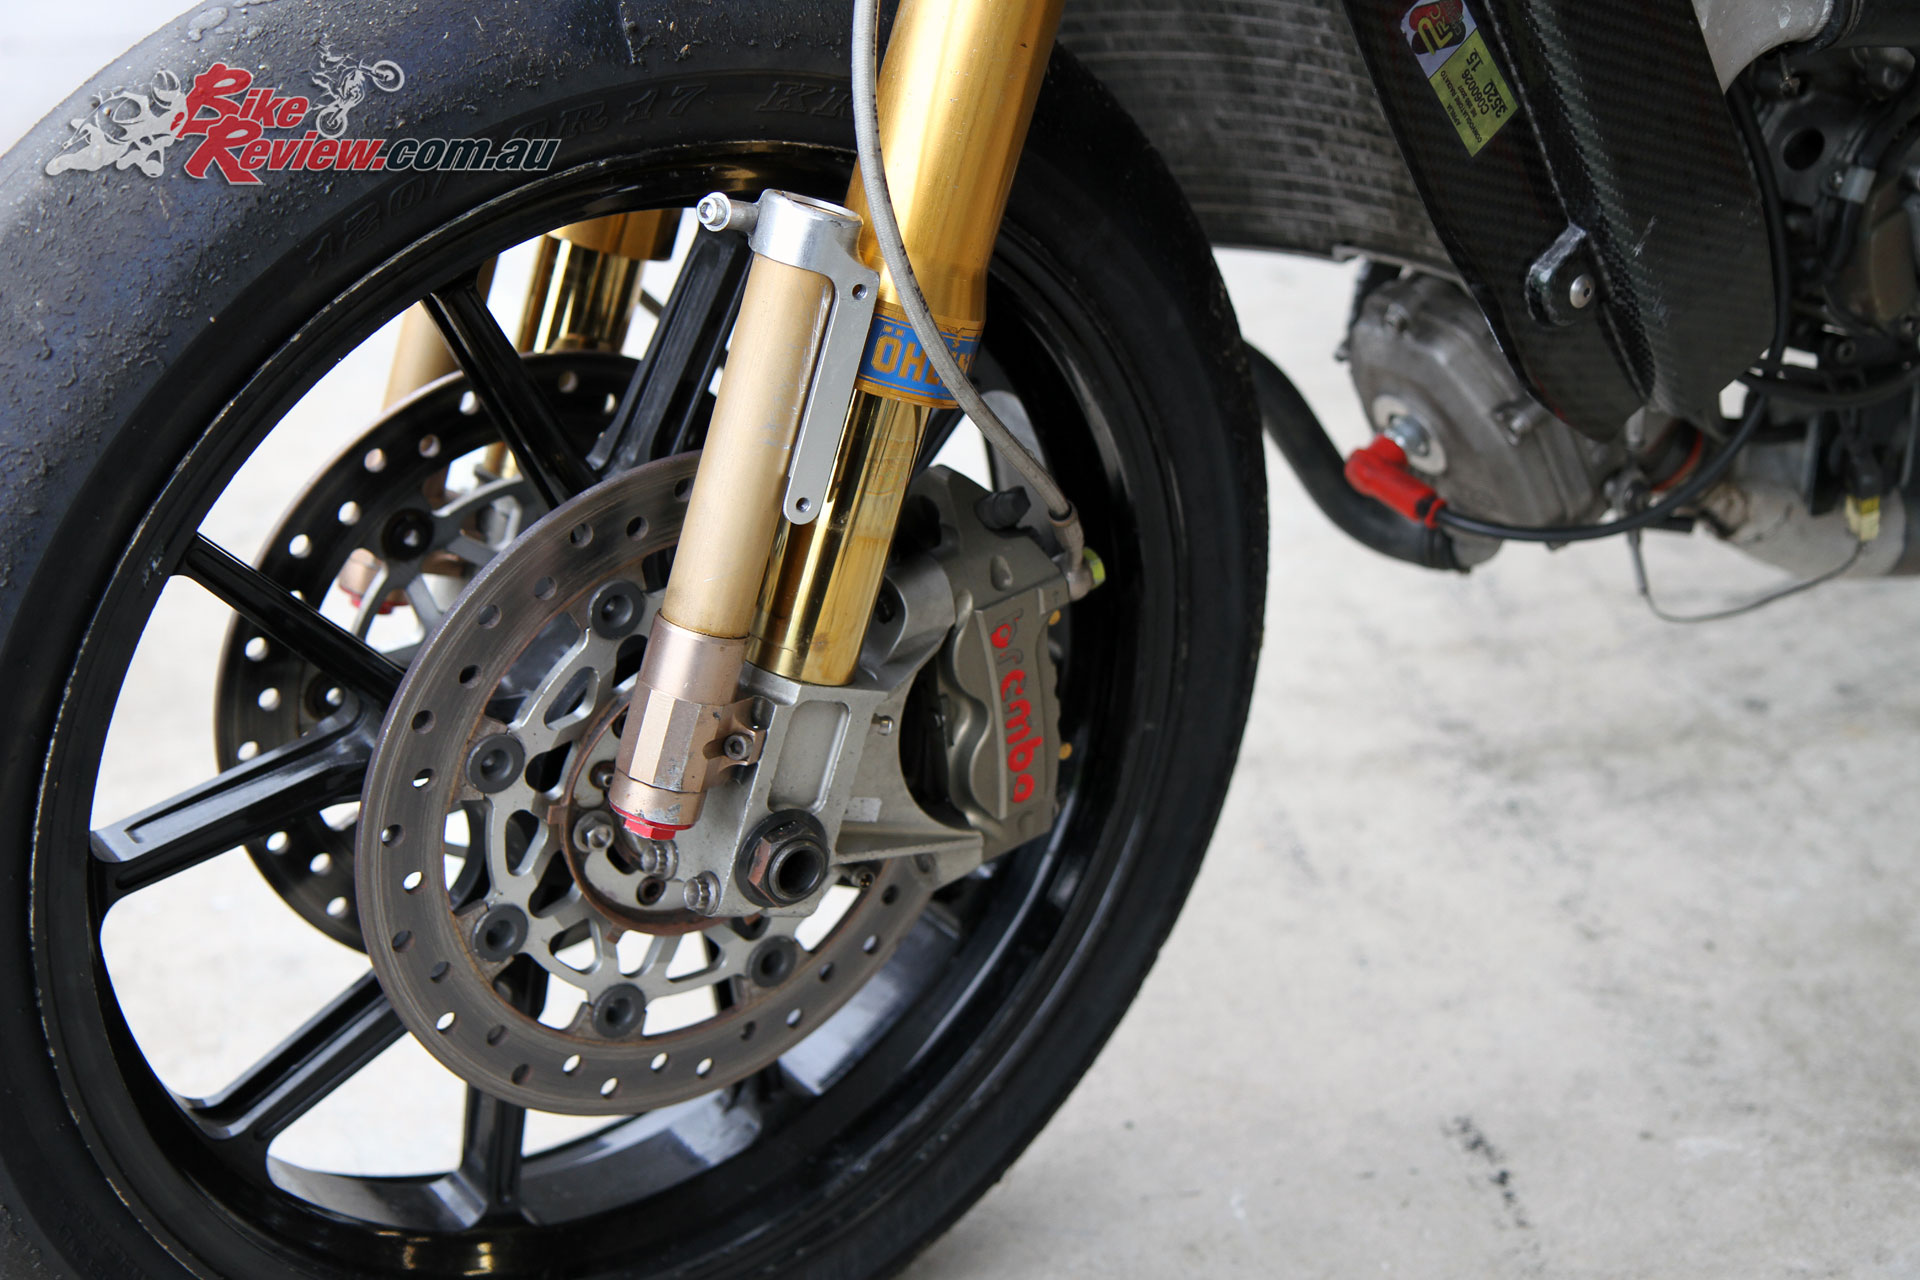 Ohlins forks with external chambers.